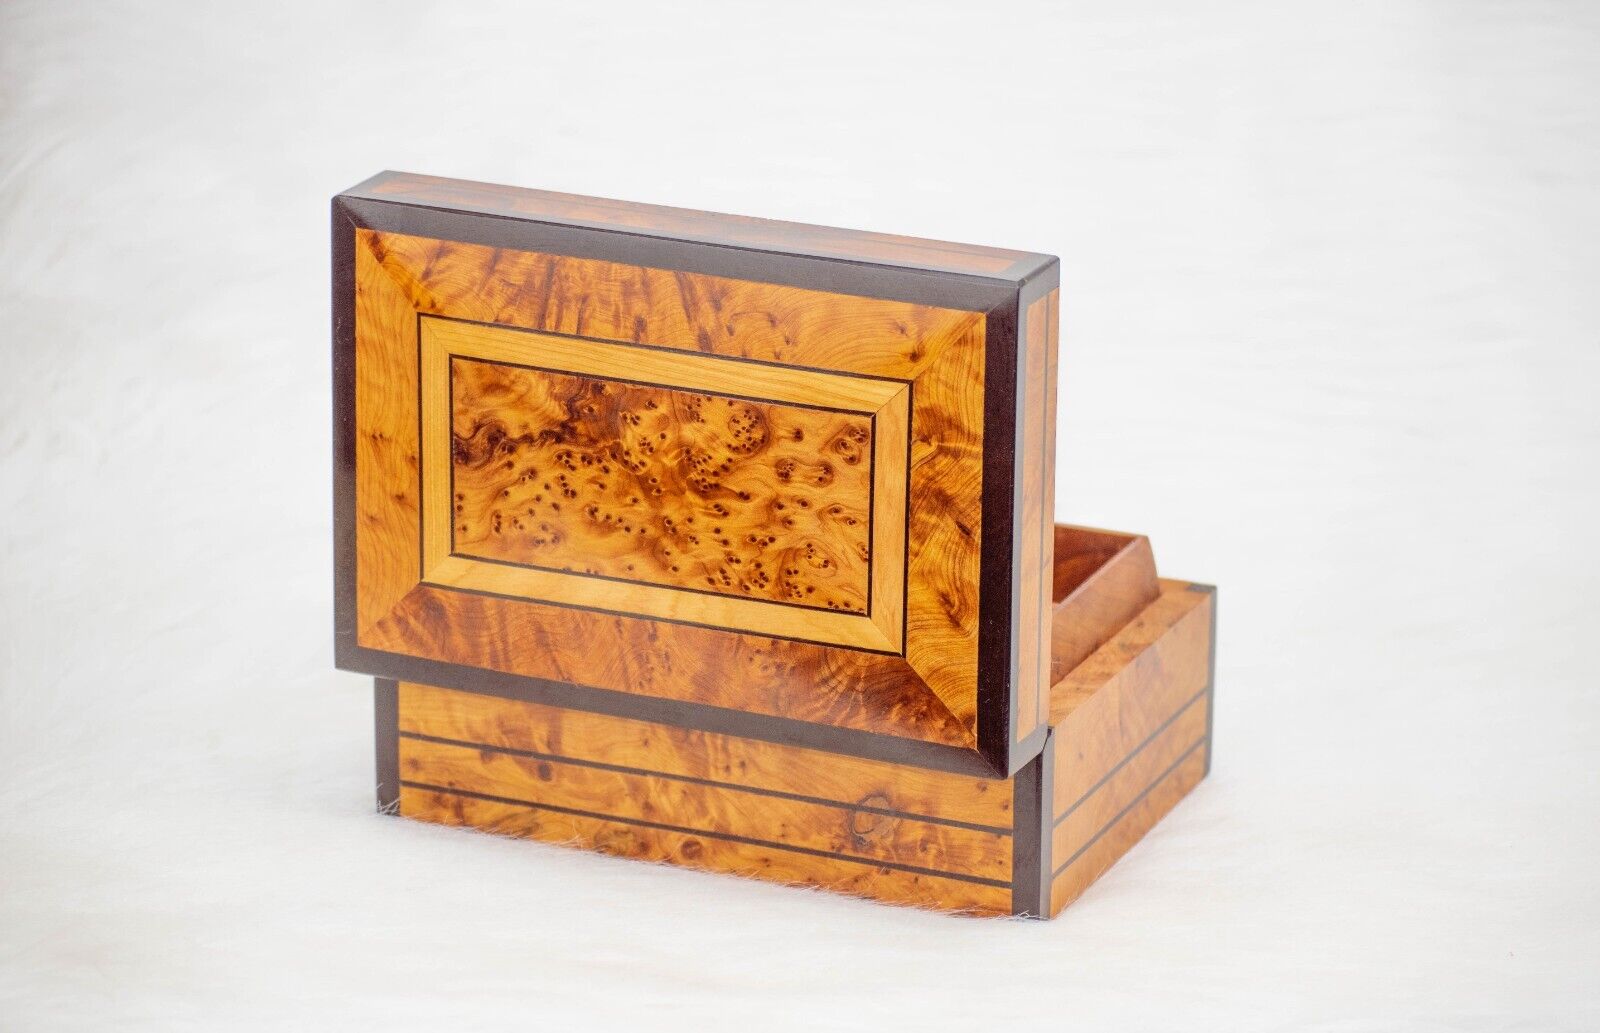 10x 6 wood box with lid box wooden decor watch thuya antique jewelry gift box